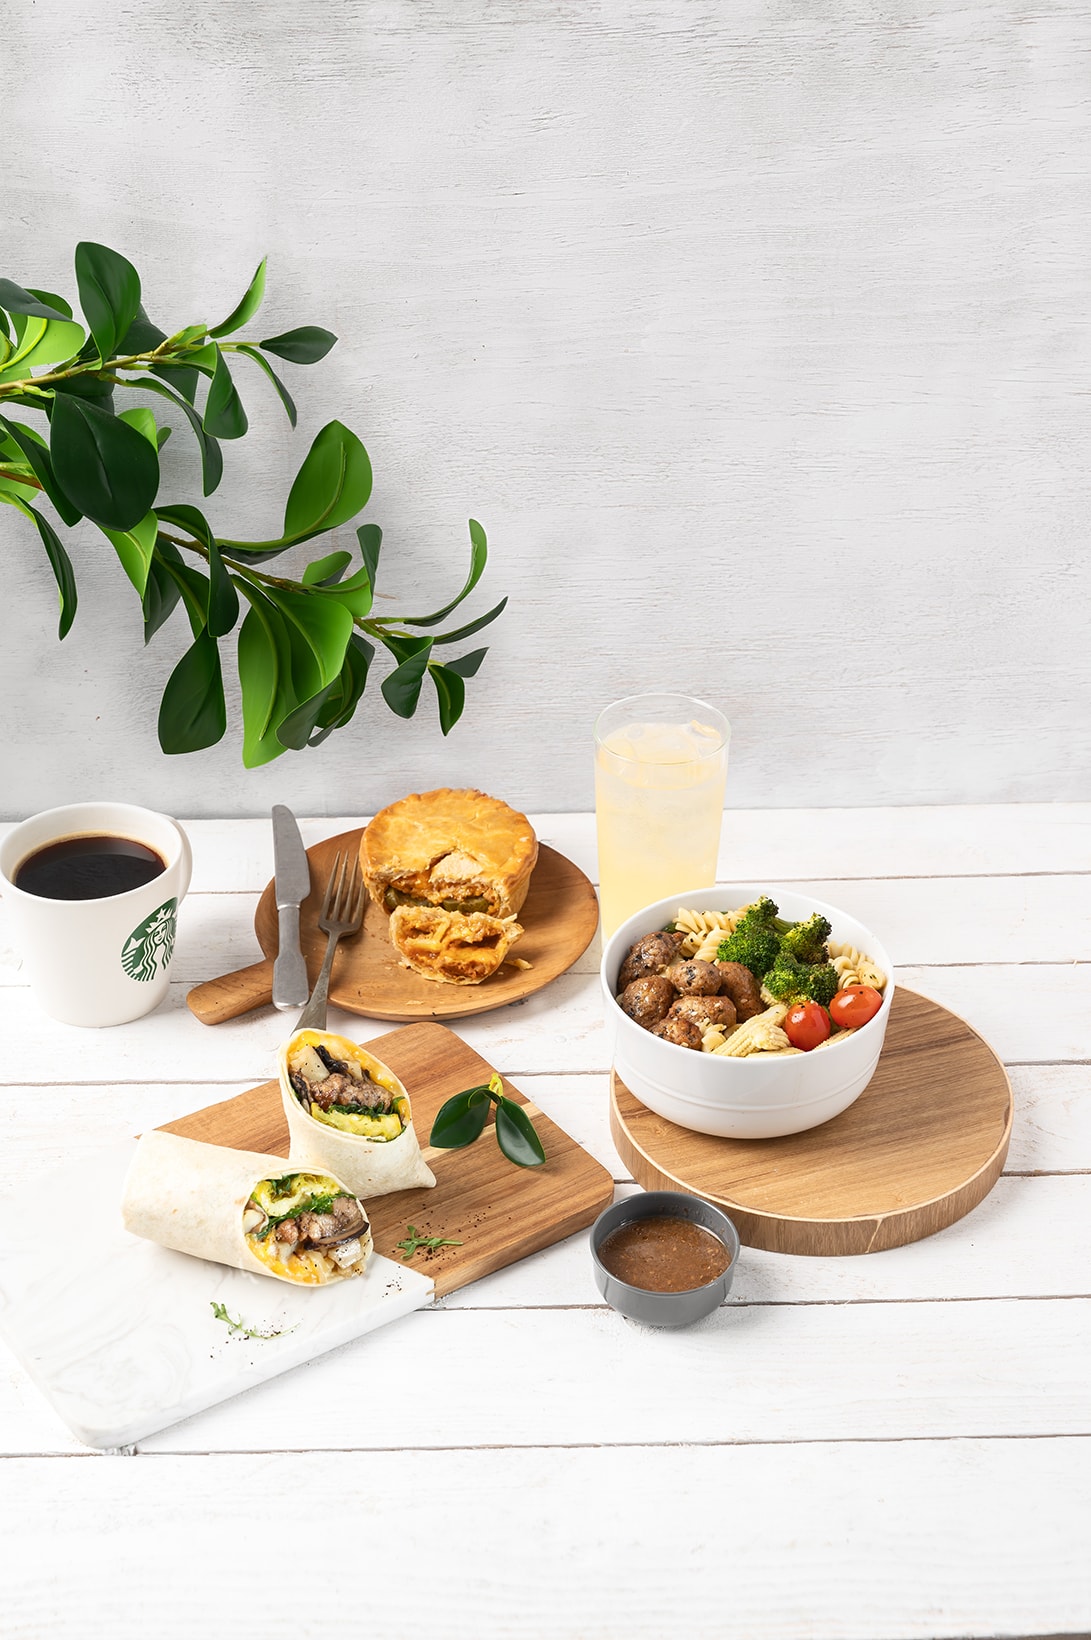 starbucks asia hong kong singapore plant based vegan coffee impossible meat pastries sandwiches wraps pies